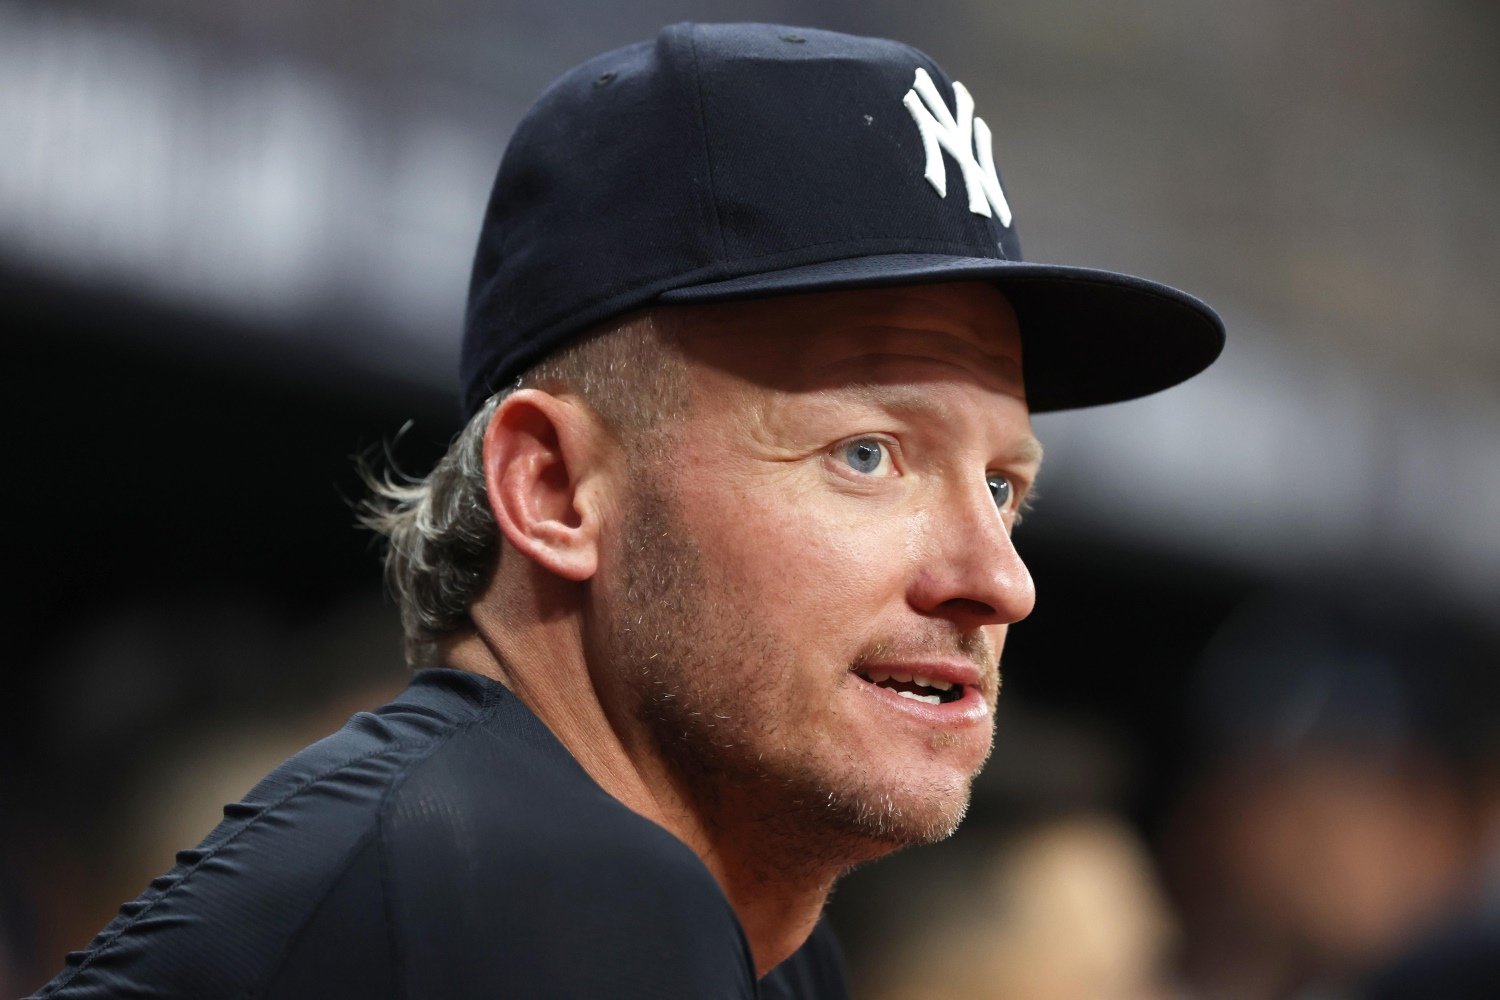 Josh Donaldson Represents the Final Test of Superstar Manager Craig  Counsell - Brewers - Brewer Fanatic